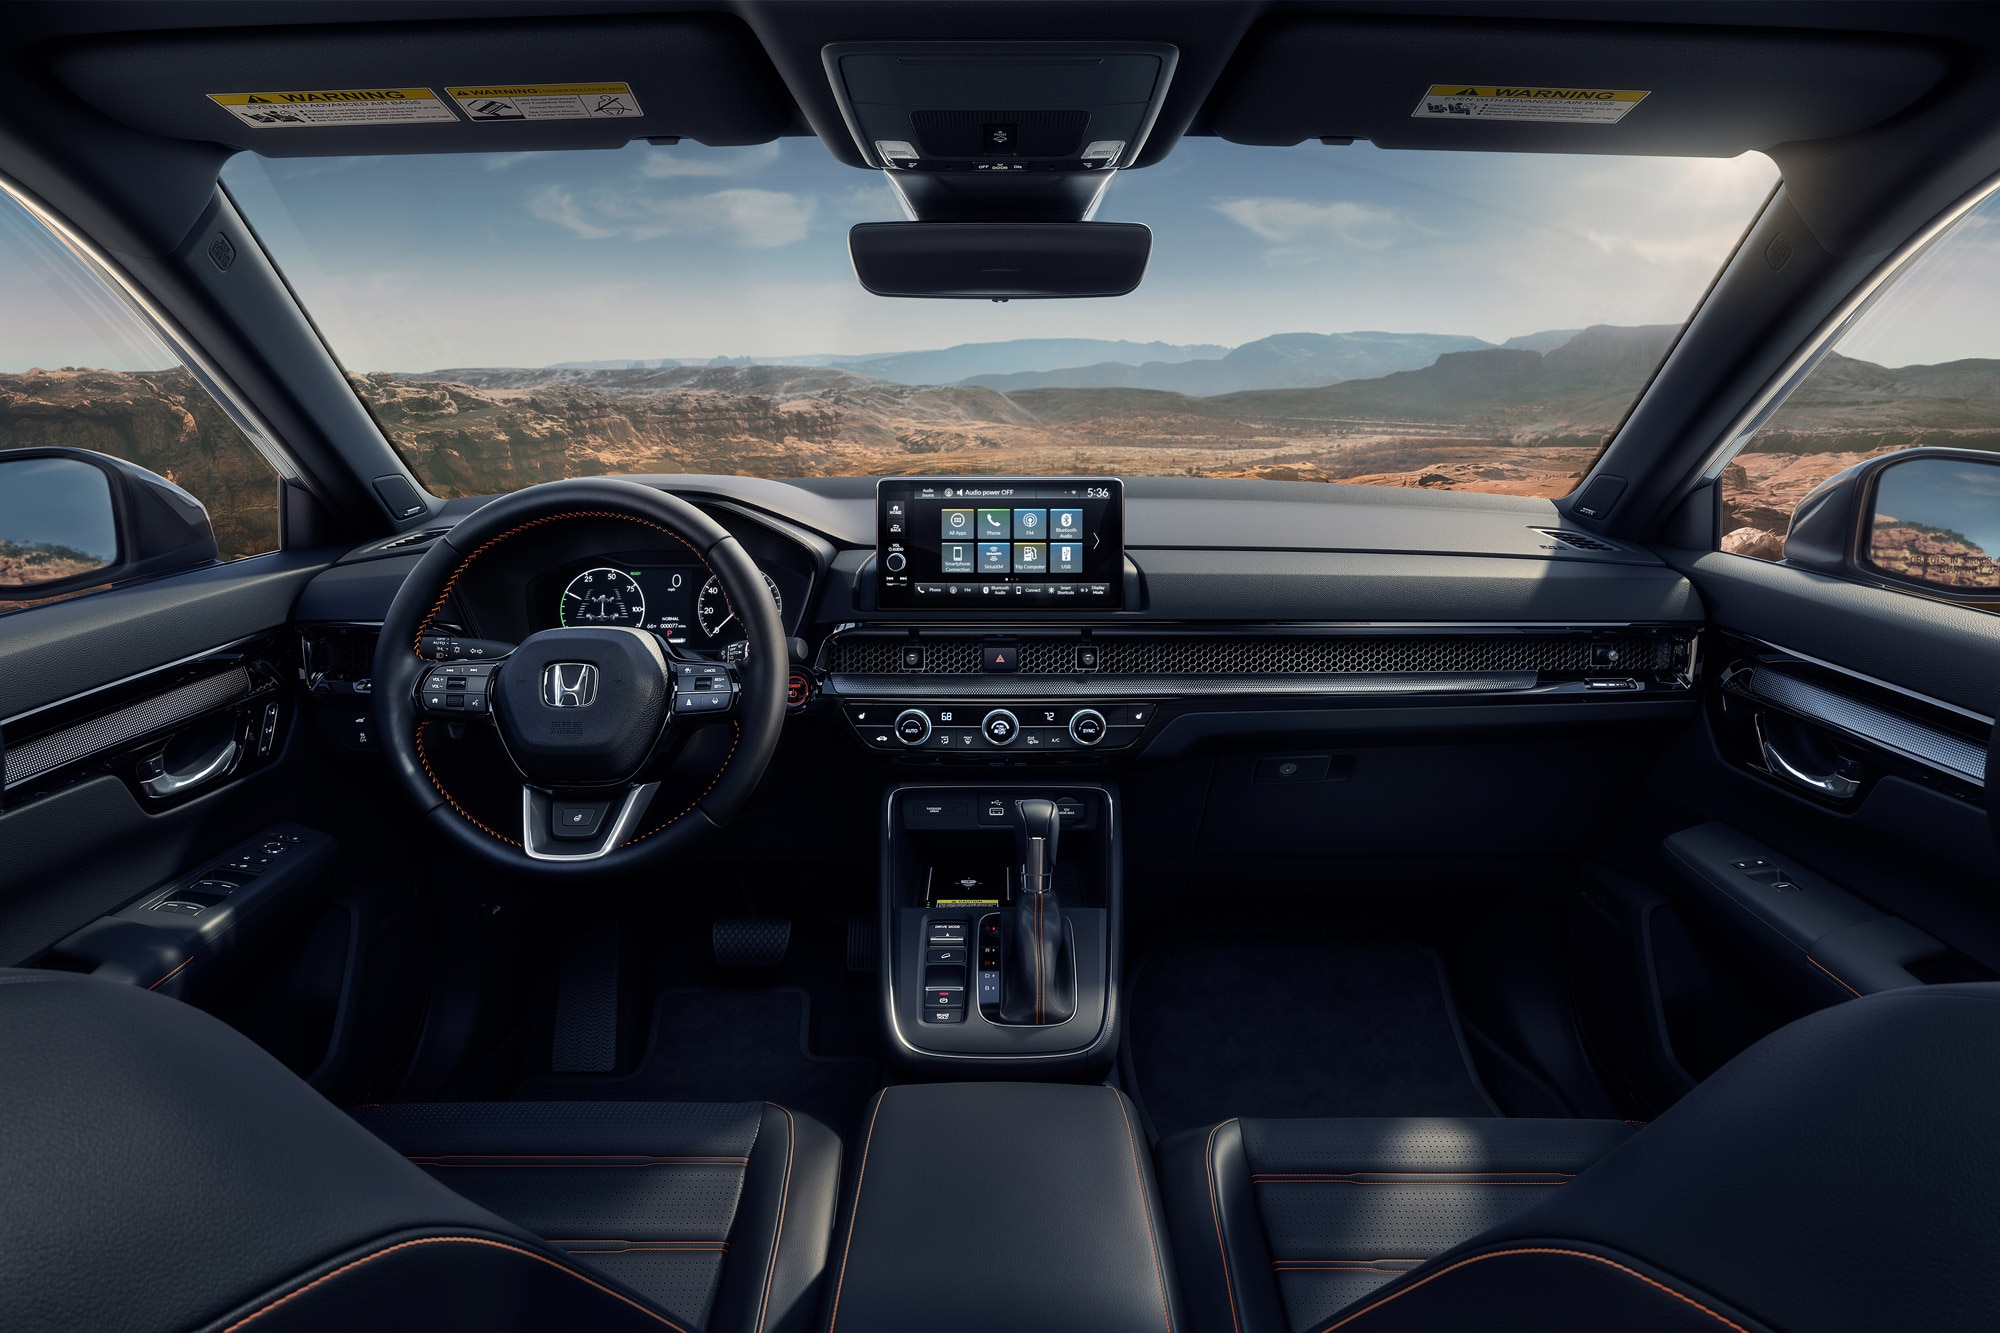 2023 Honda CR-V interior and dashboard with mountain view